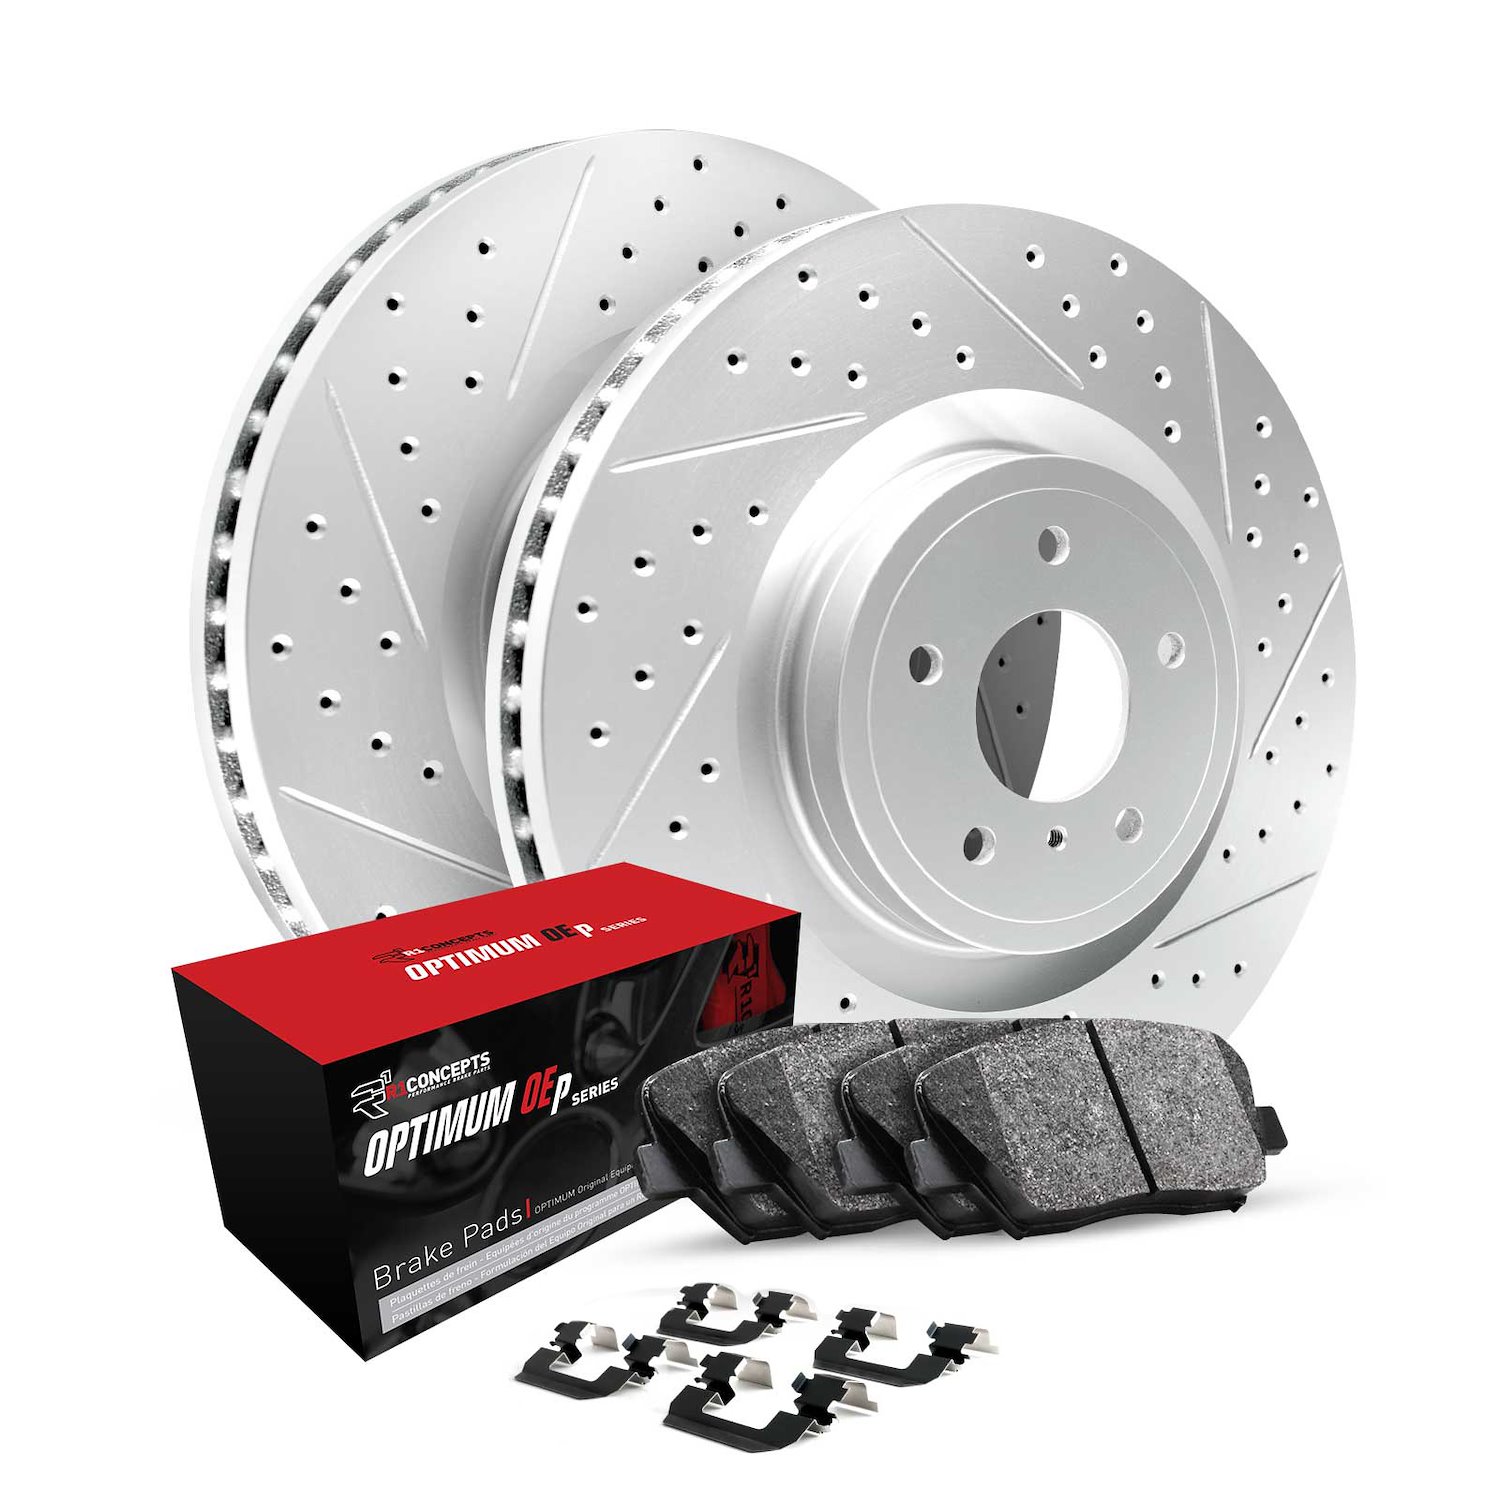 GEO-Carbon Drilled/Slotted Rotors w/Optimum OE Pads/Hardware, 1994-2005 Fits Multiple Makes/Models, Position: Rear